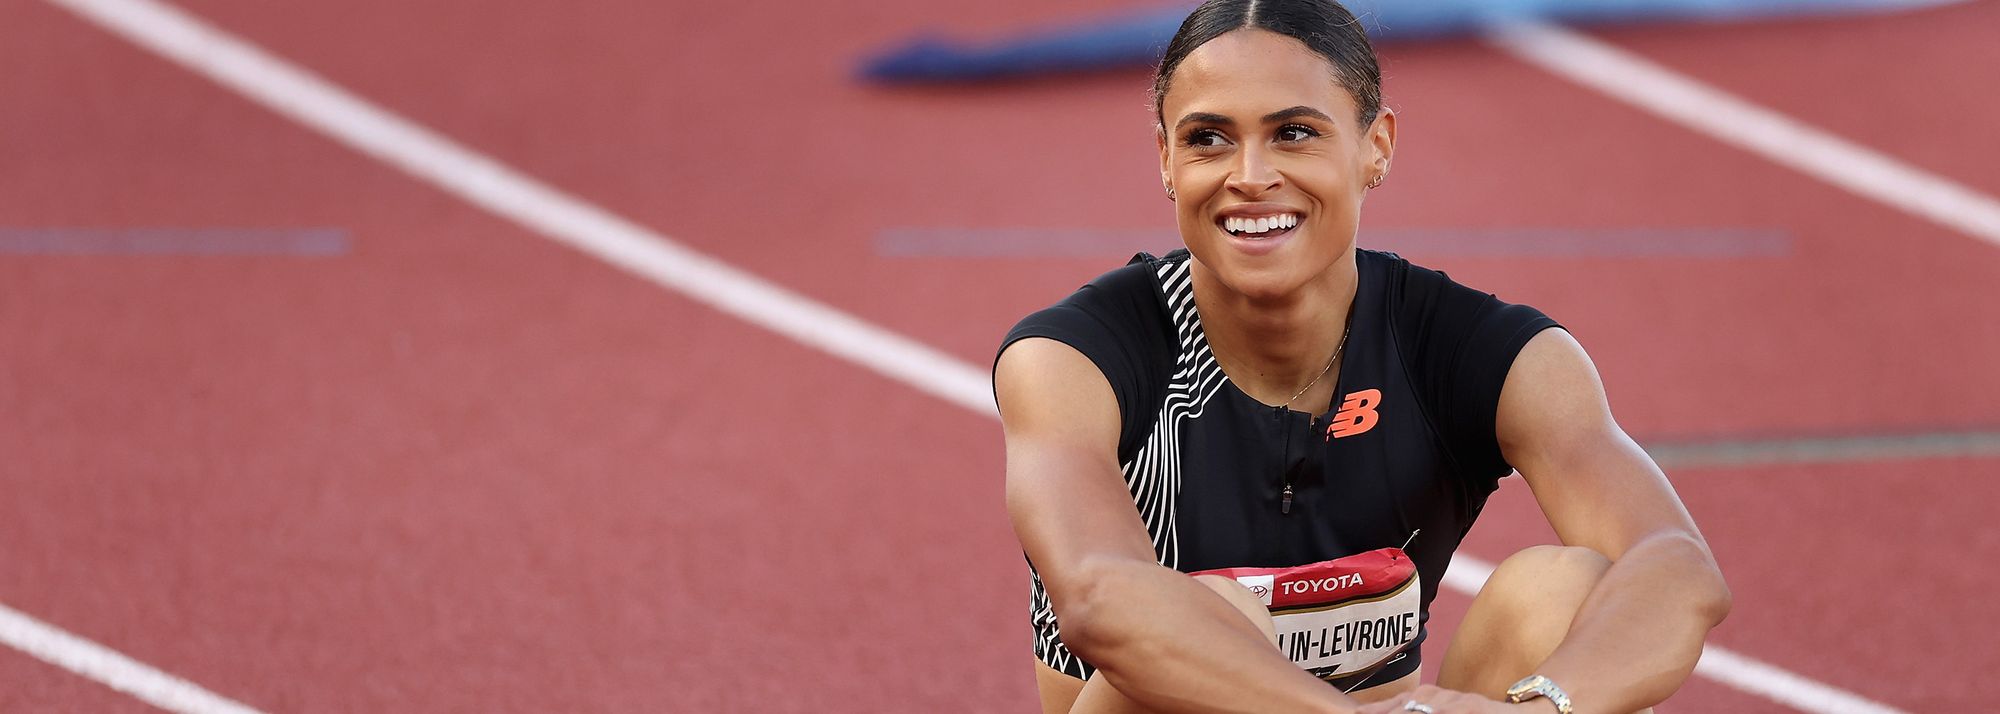 Sydney McLaughlin-Levrone set a world lead of 52.70 to win her first 400m hurdles race in almost 22 months at the Edwin Moses Legends Meet